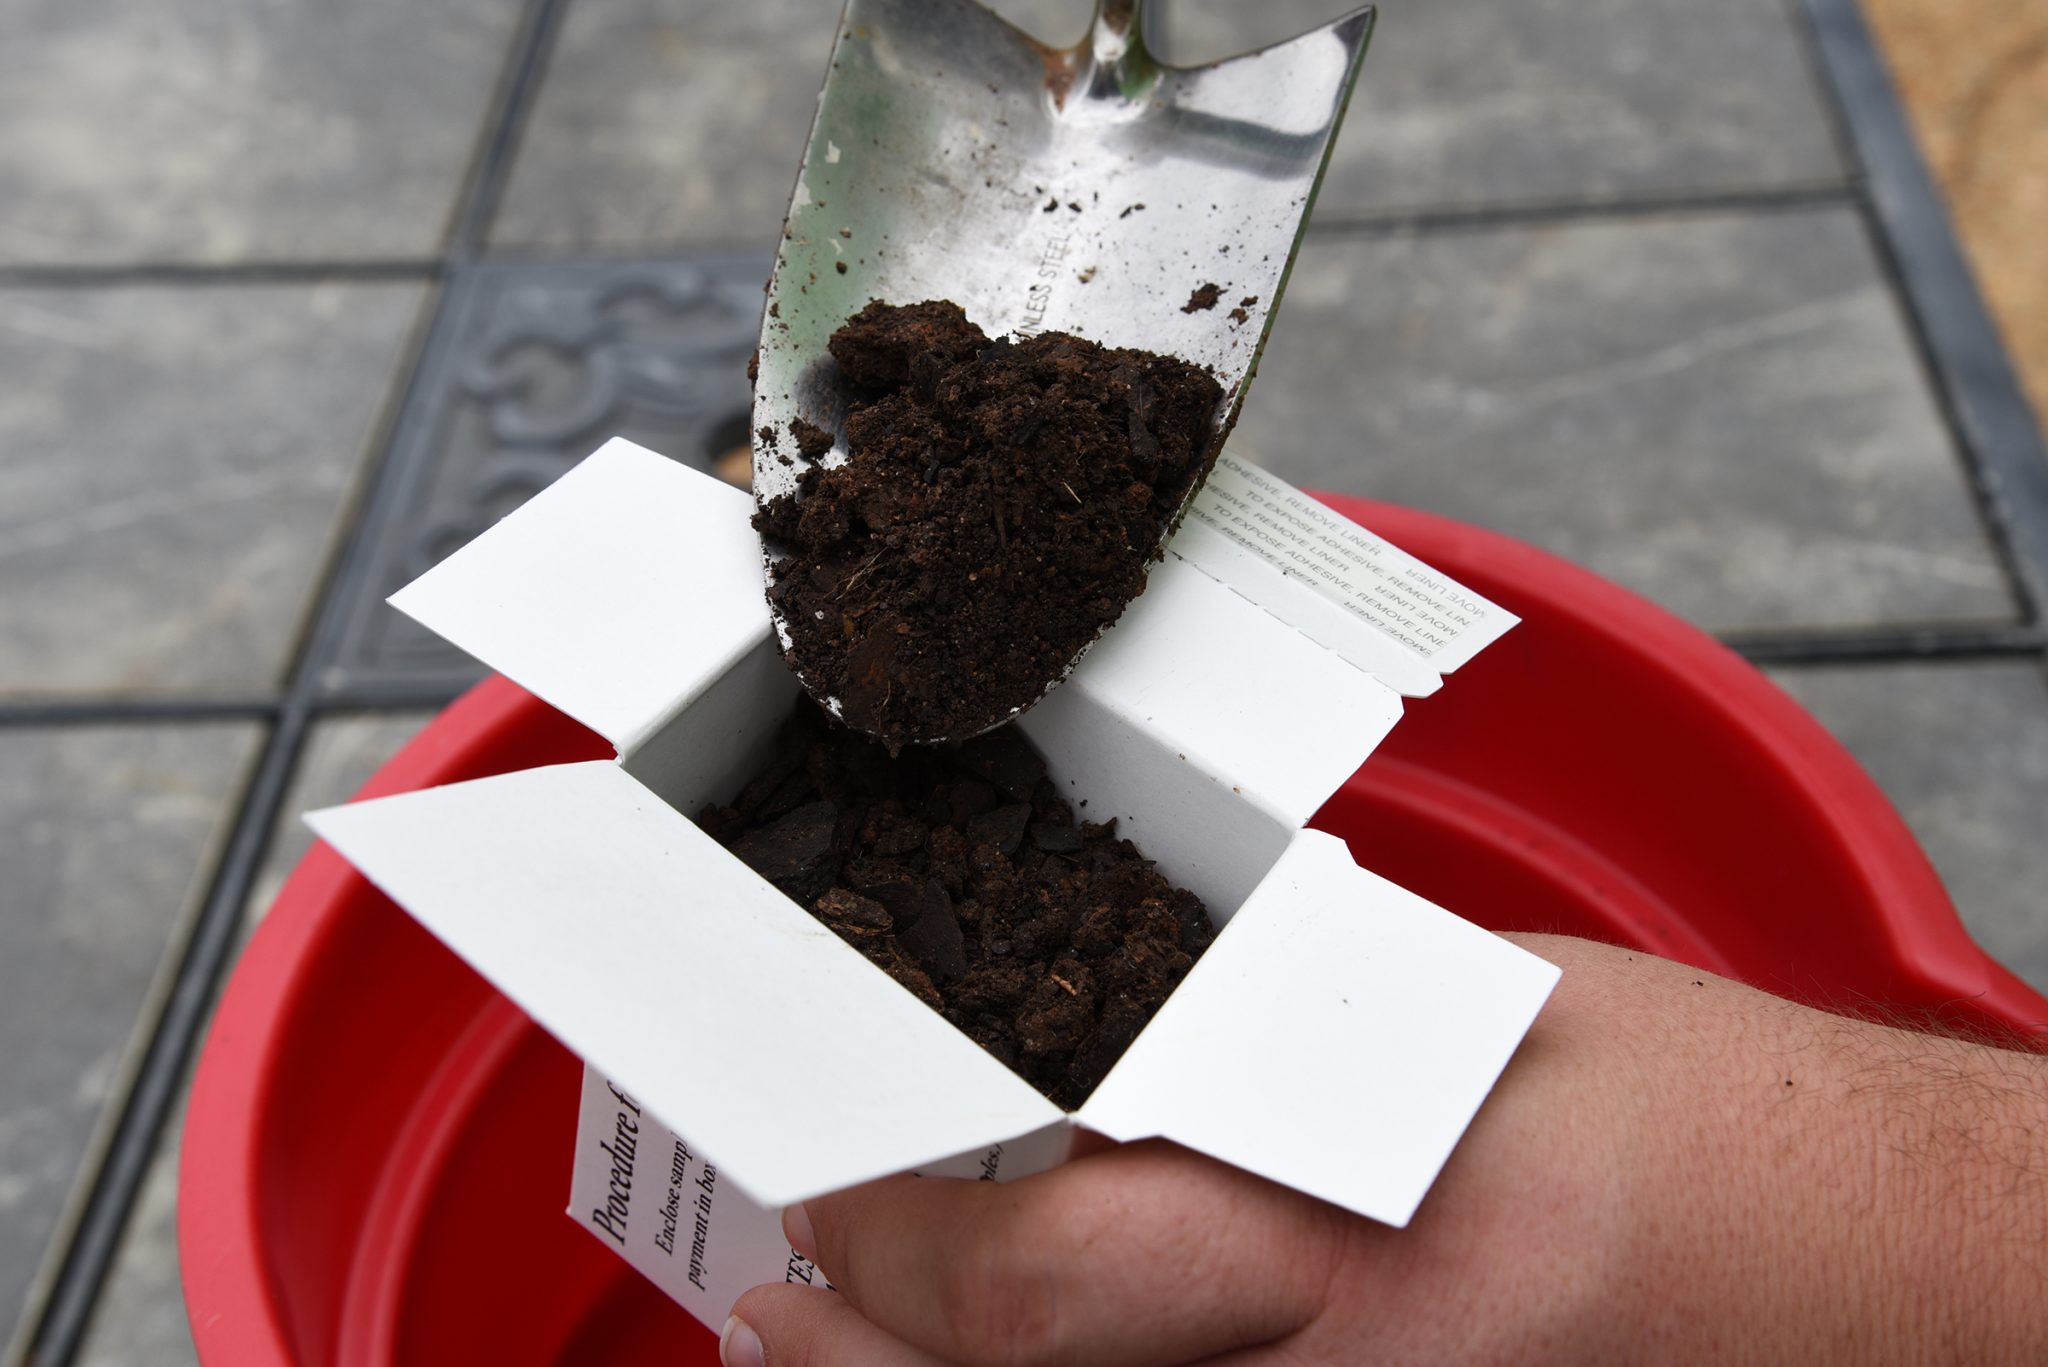 Figure 4. Place about 1 pint of the mixture into a soil sample box.